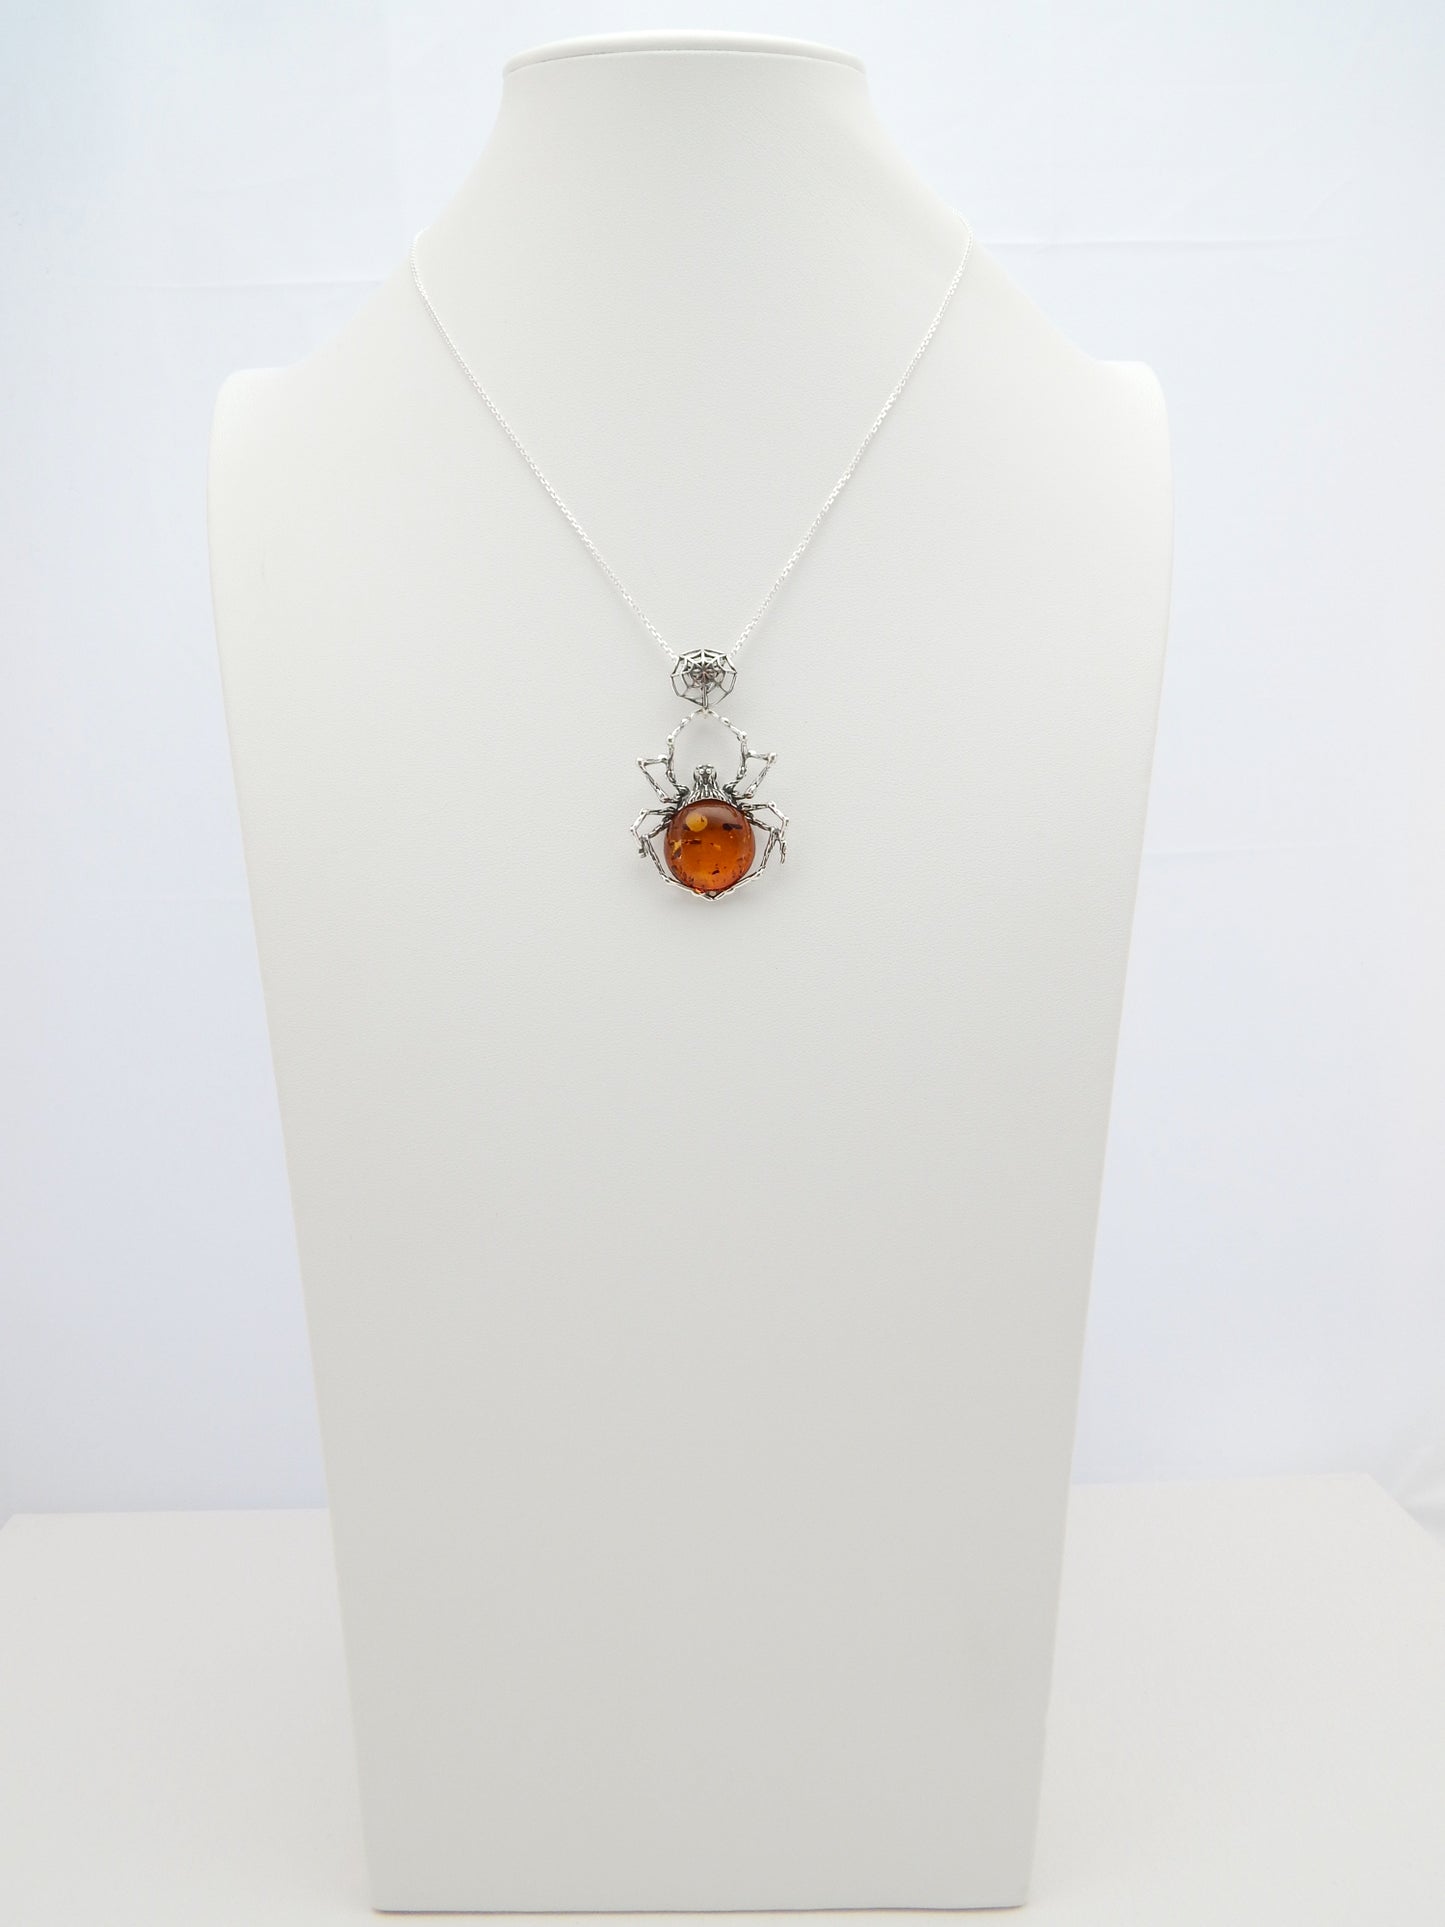 Natural Baltic Cognac Amber Spider Pendant Necklace in 925 Sterling Silver